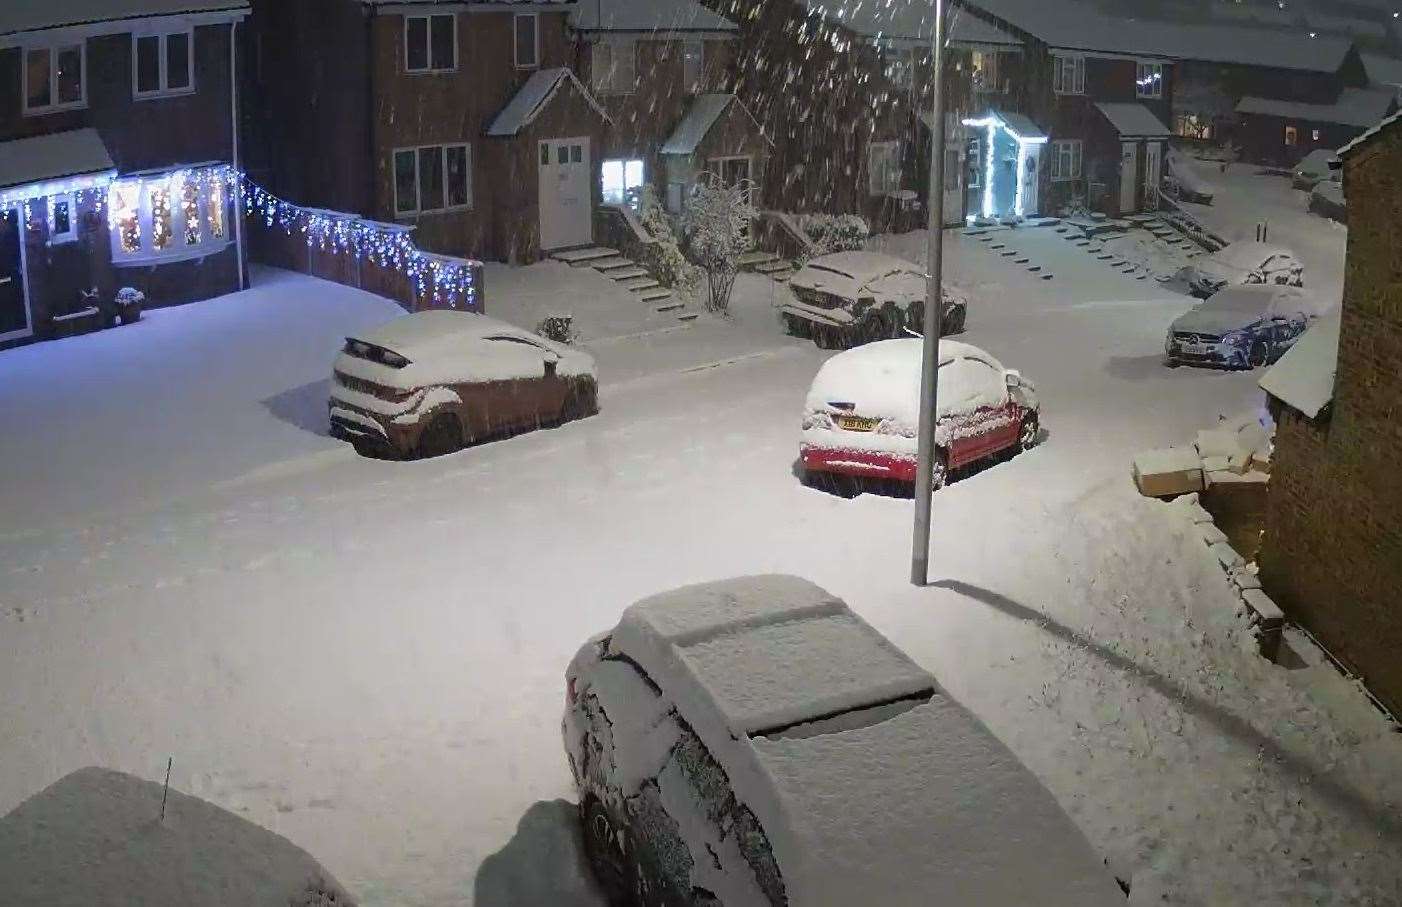 Residents say they cannot even get off their driveways when it snows. Picture: Matt Nolan